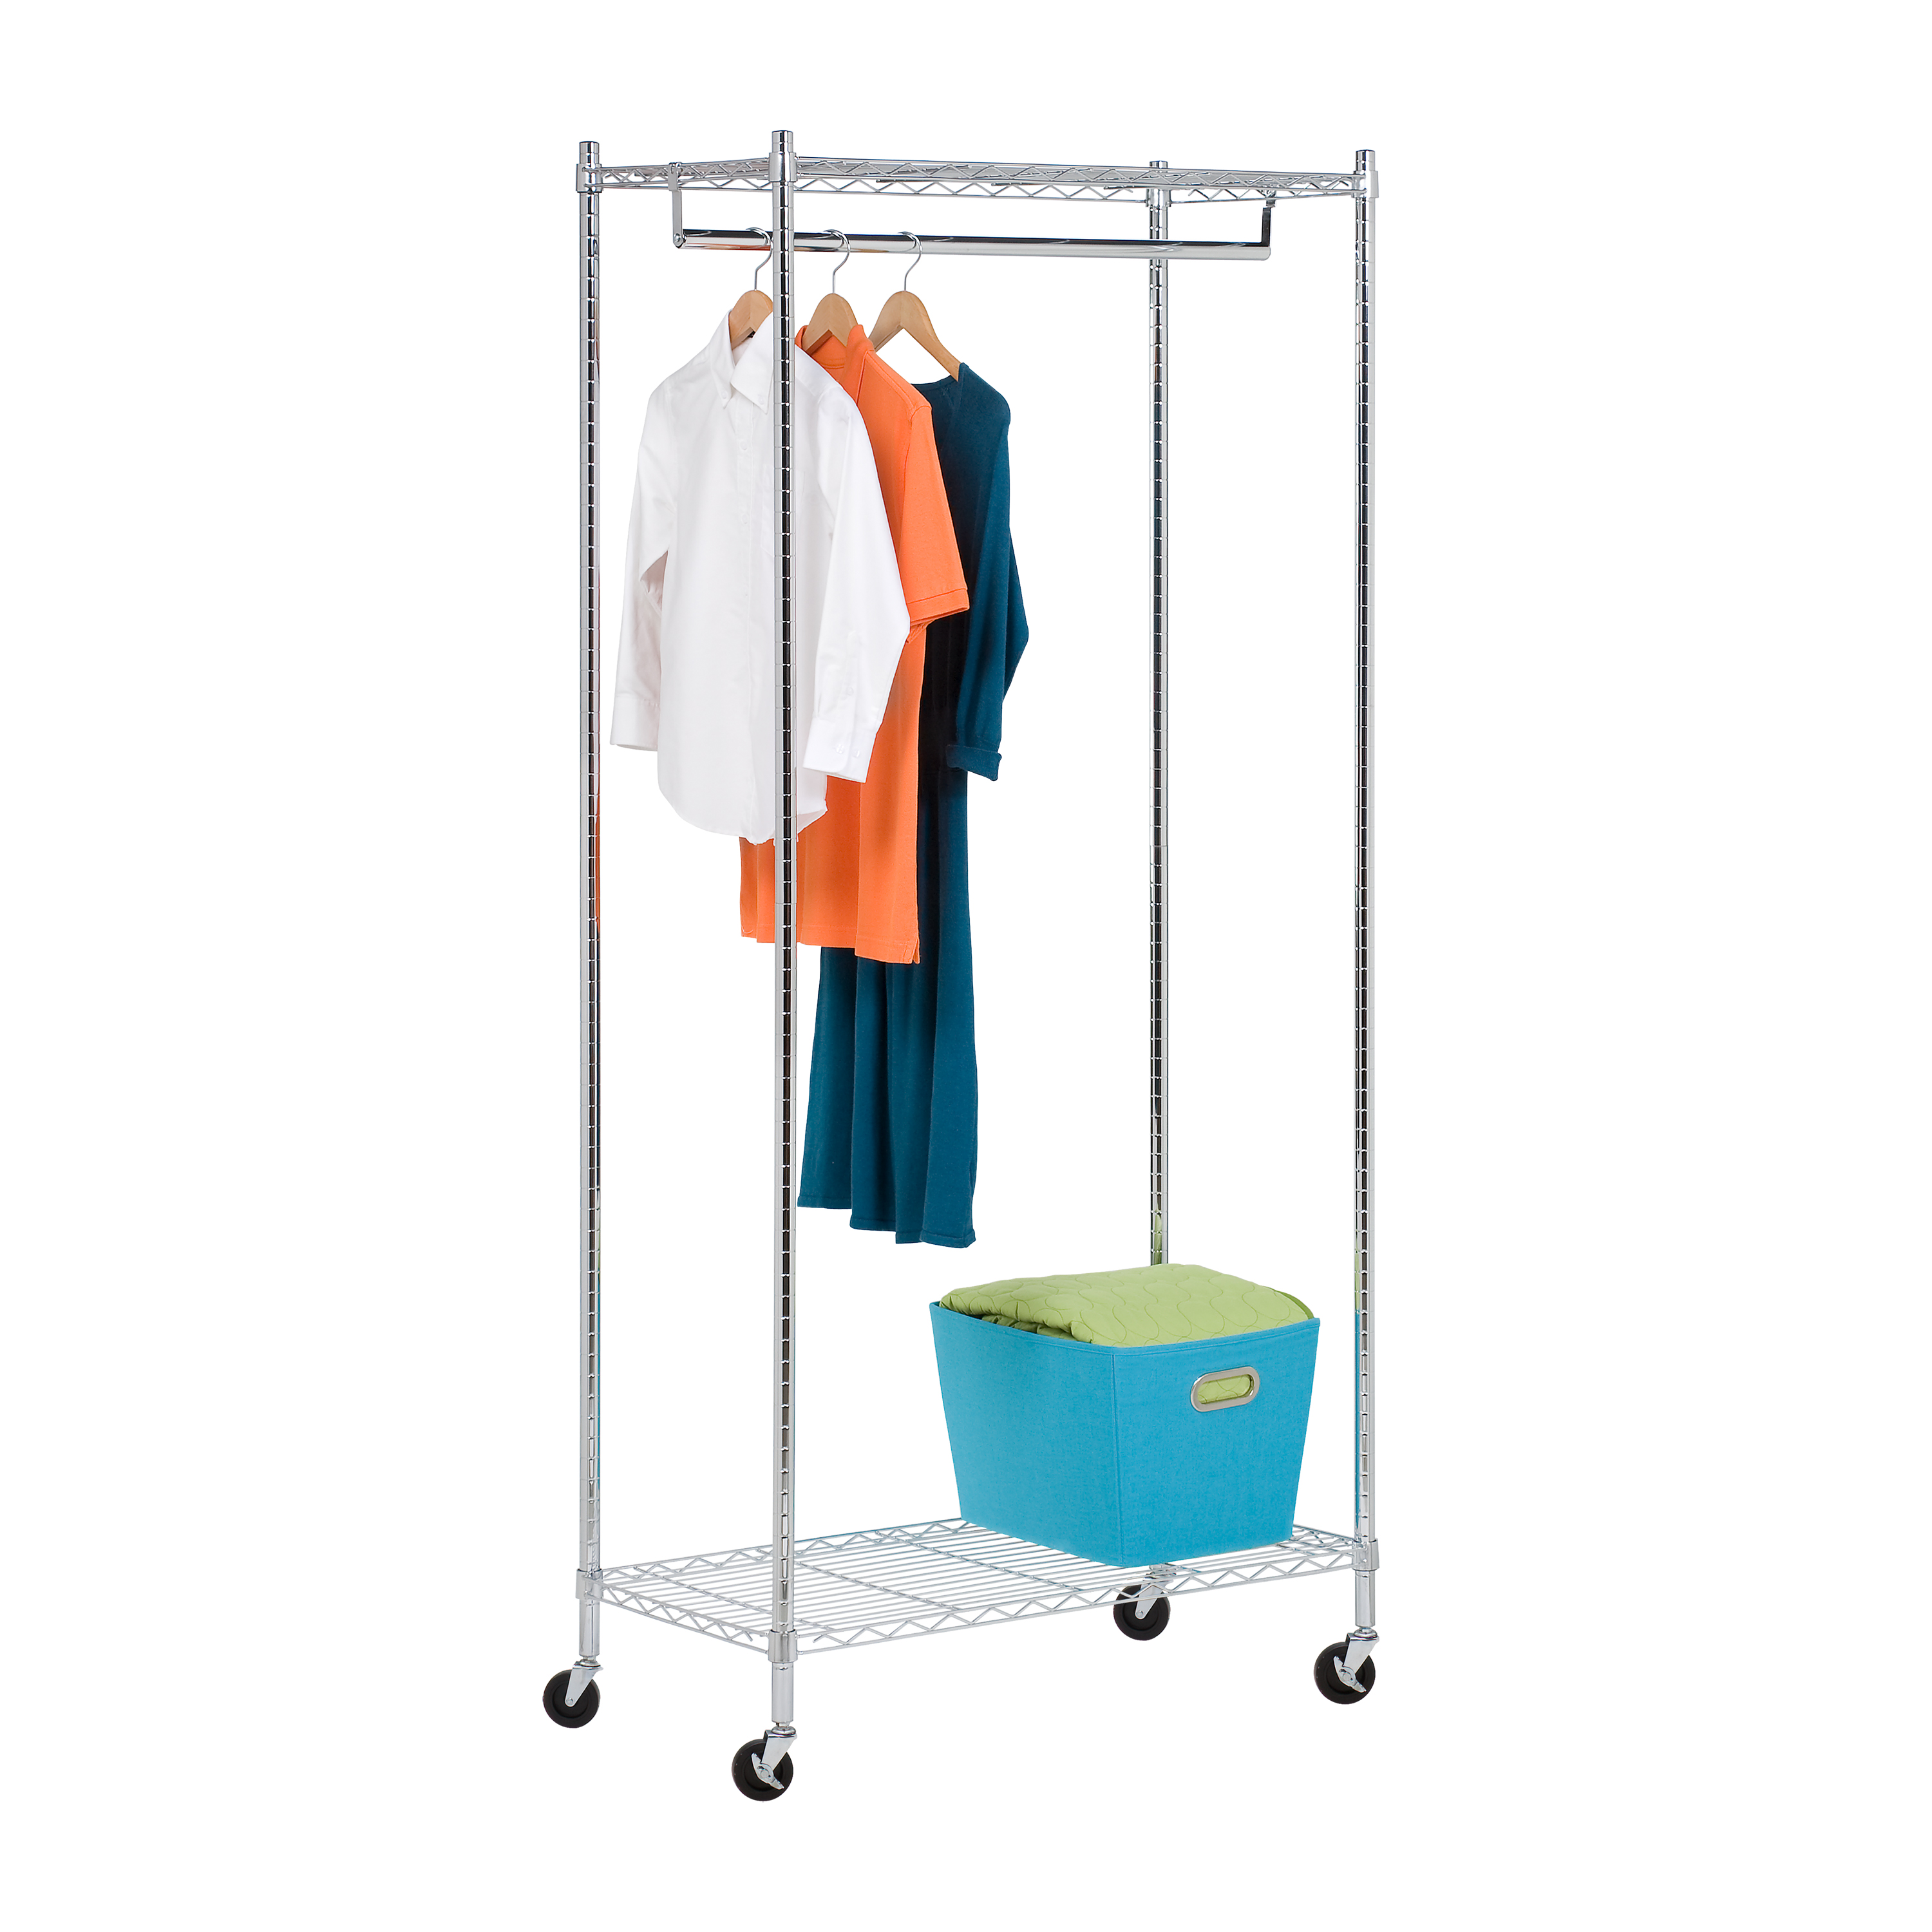 Honey-Can-Do Steel Heavy Duty Rolling Clothes Rack with 2 Shelves, Chrome - image 3 of 10